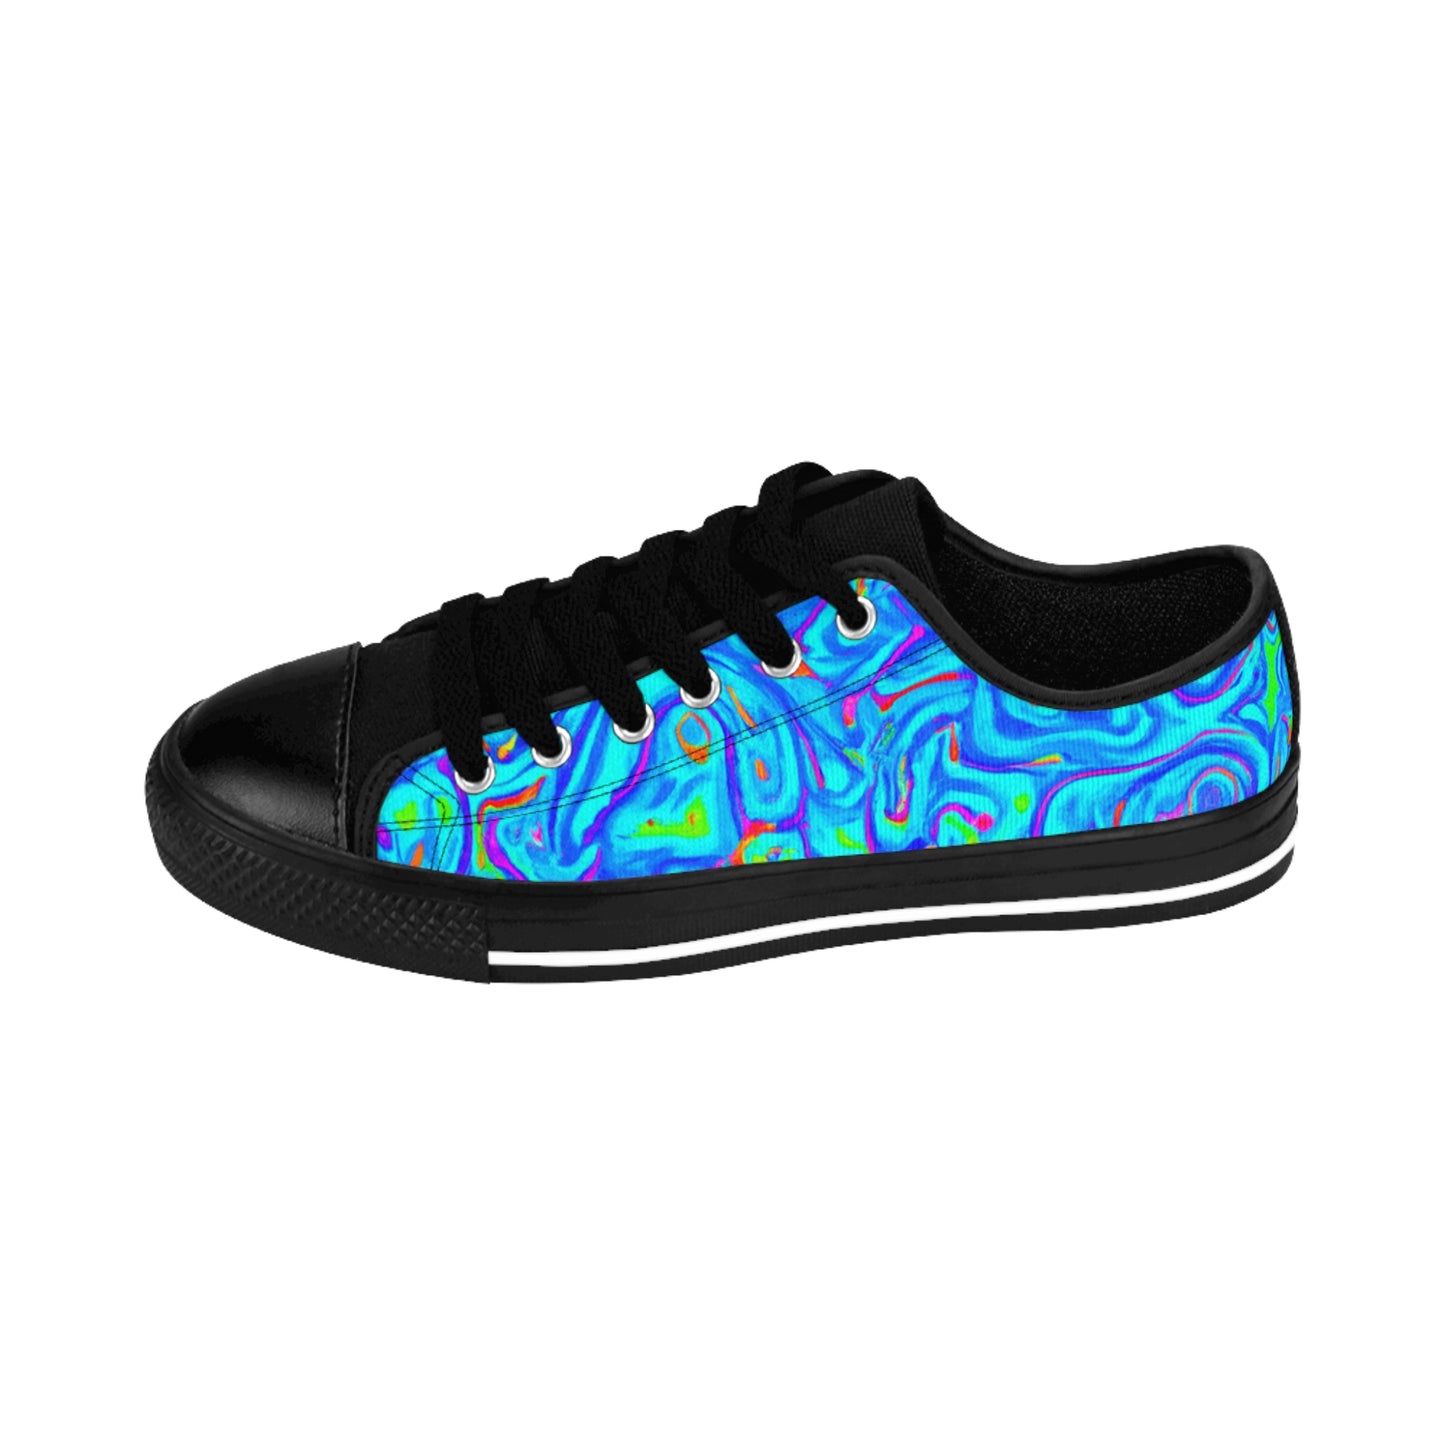 Salazar the Shoemaker - Psychedelic Low Top